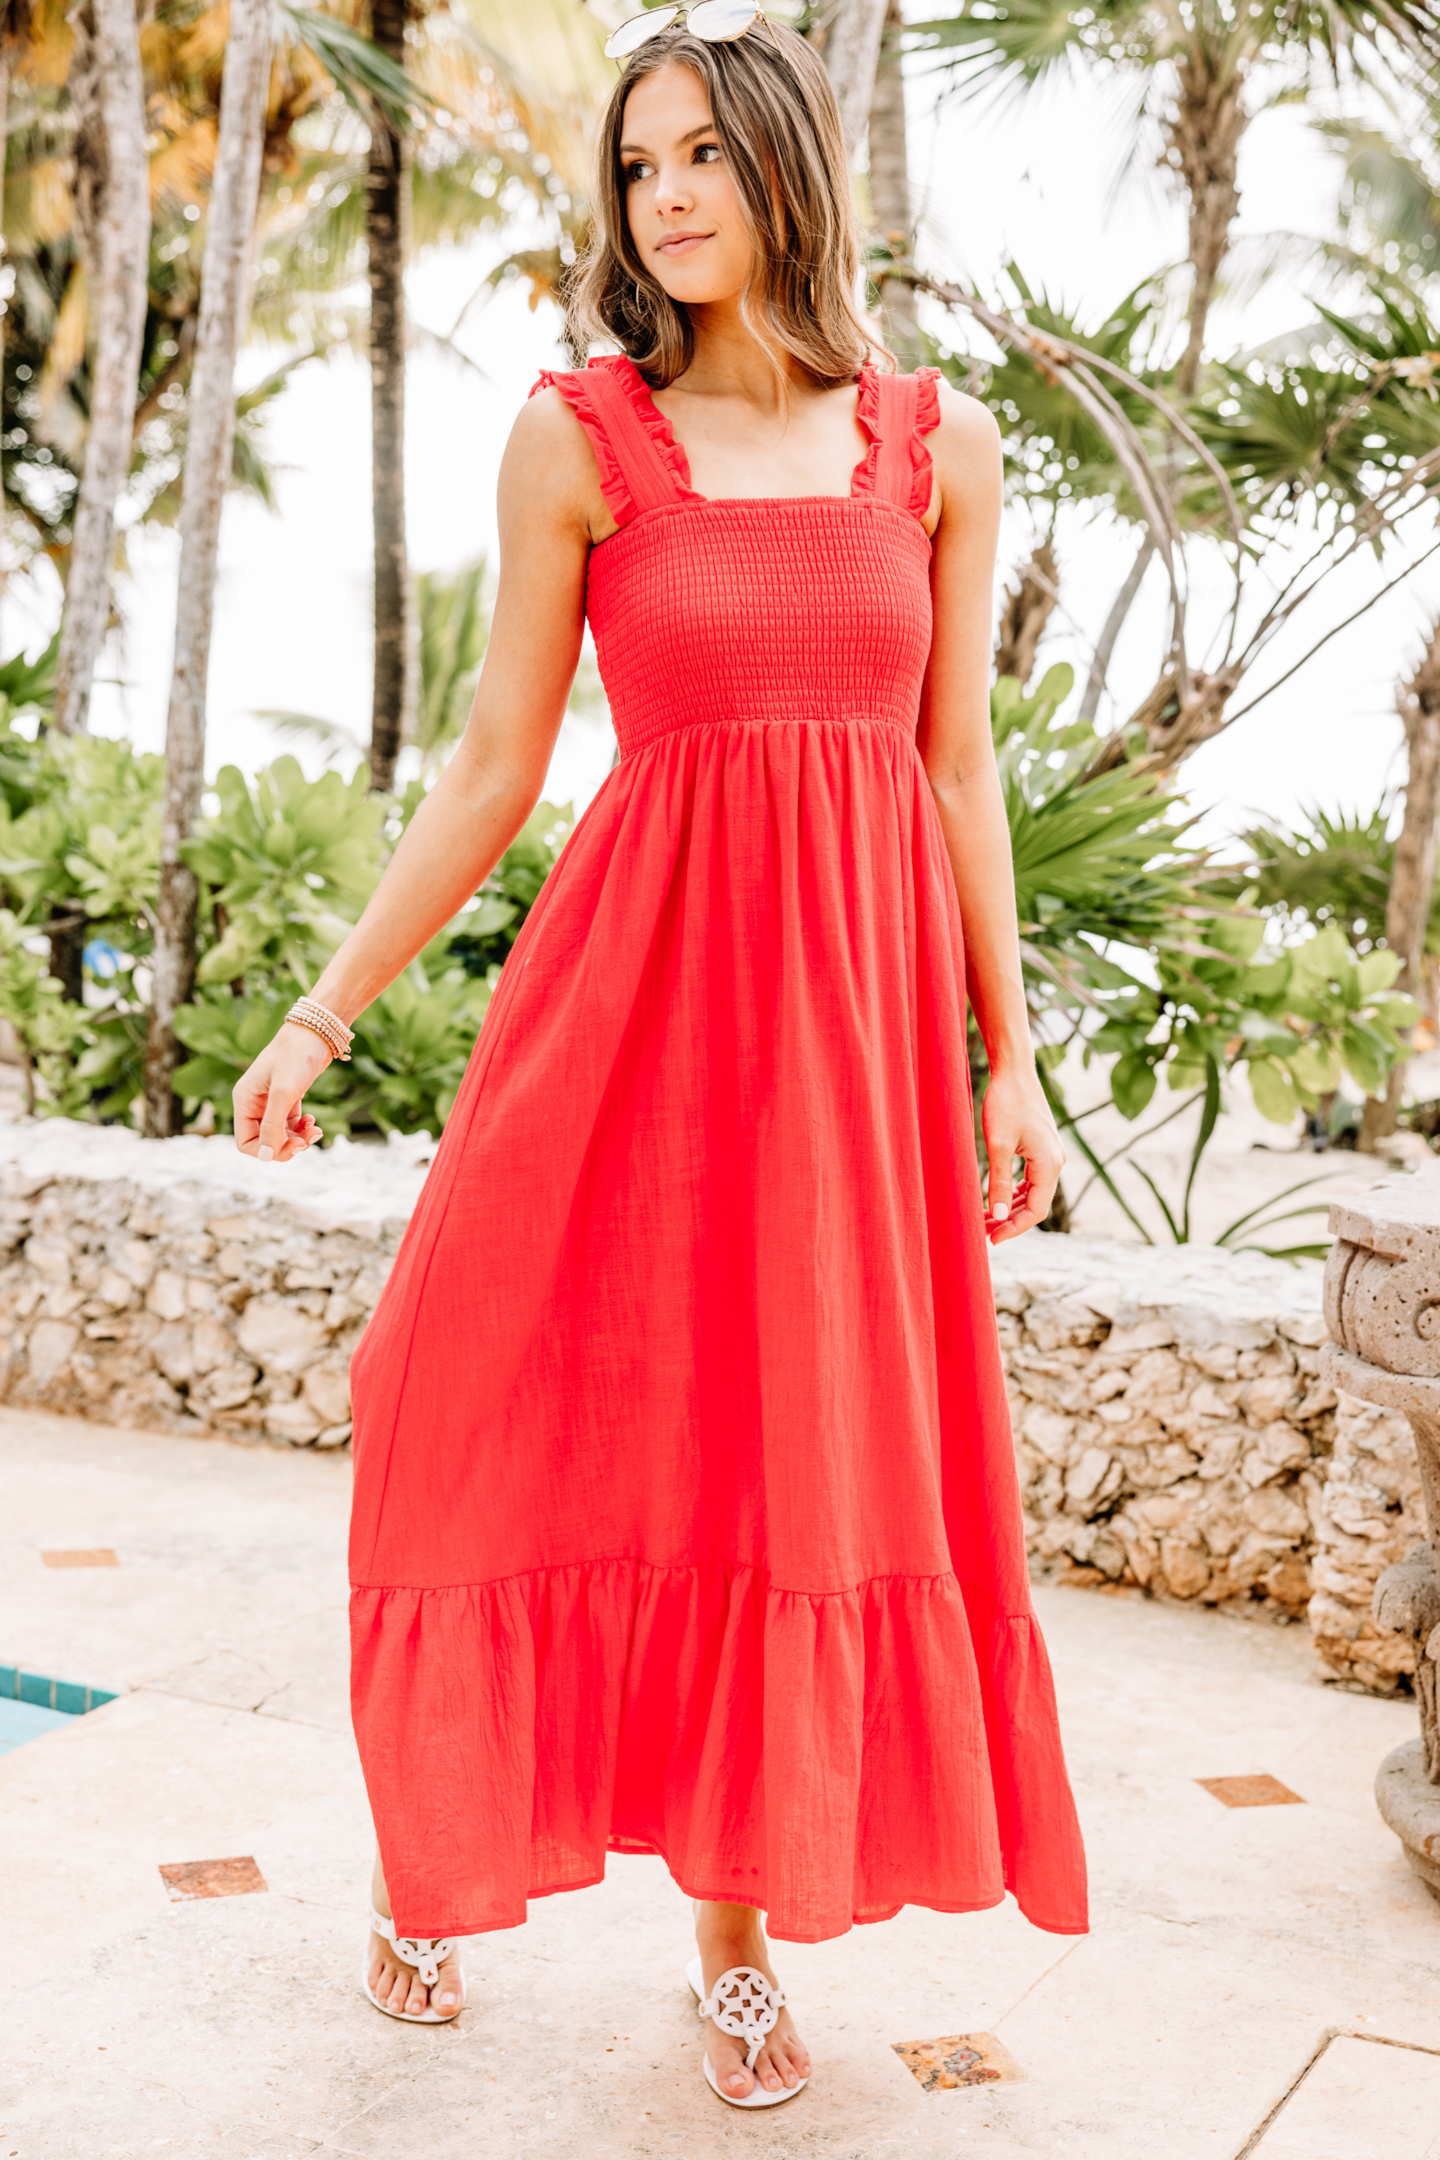 https://shopthemint.com/products/easy-love-red-smocked-maxi-dress?variant=39349844443194